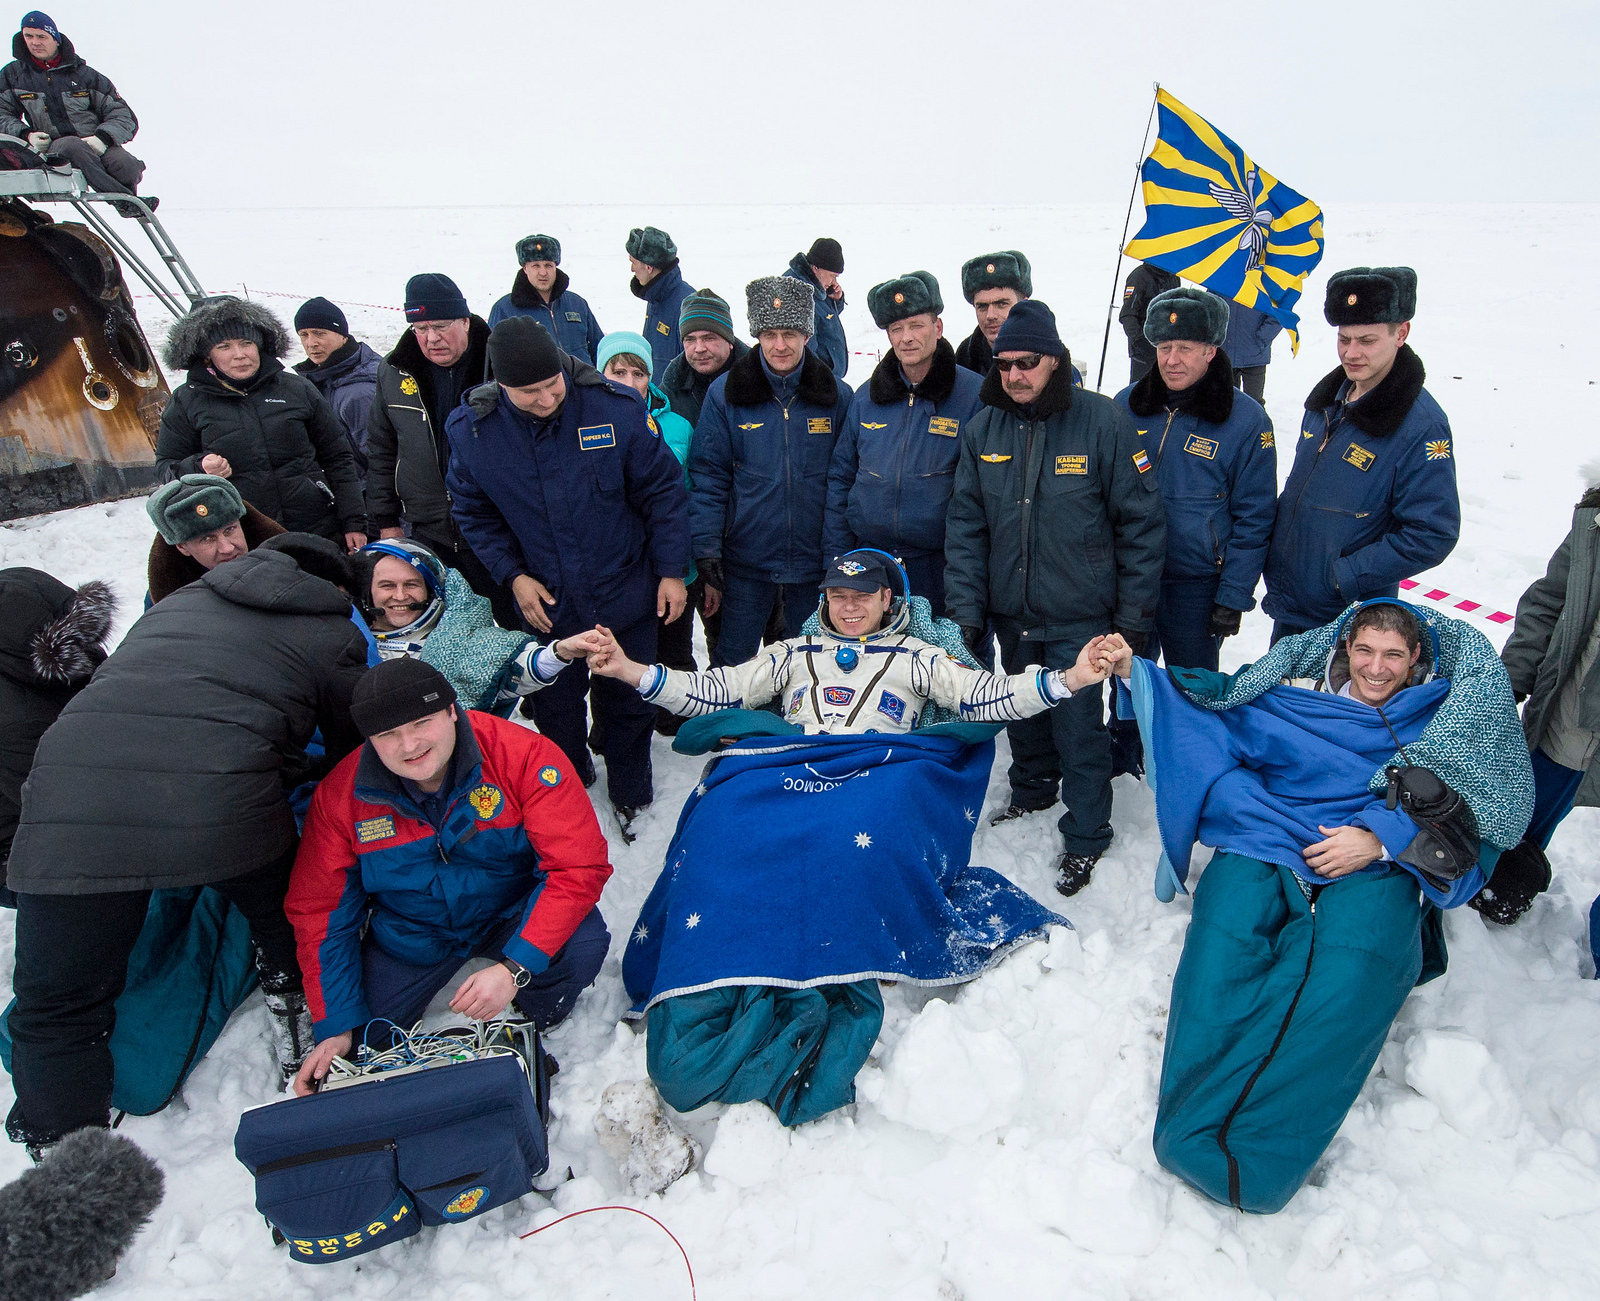 At the snowy landing site, not from the Kazakh city of Jezkazgan, Soyuz TMA-10M crewmen Oleg Kotov (center), Sergei Ryazansky (left) and Mike Hopkins (right) clasp hands in a sign of solidarity and recognition of a mission well done. Photo Credit: NASA